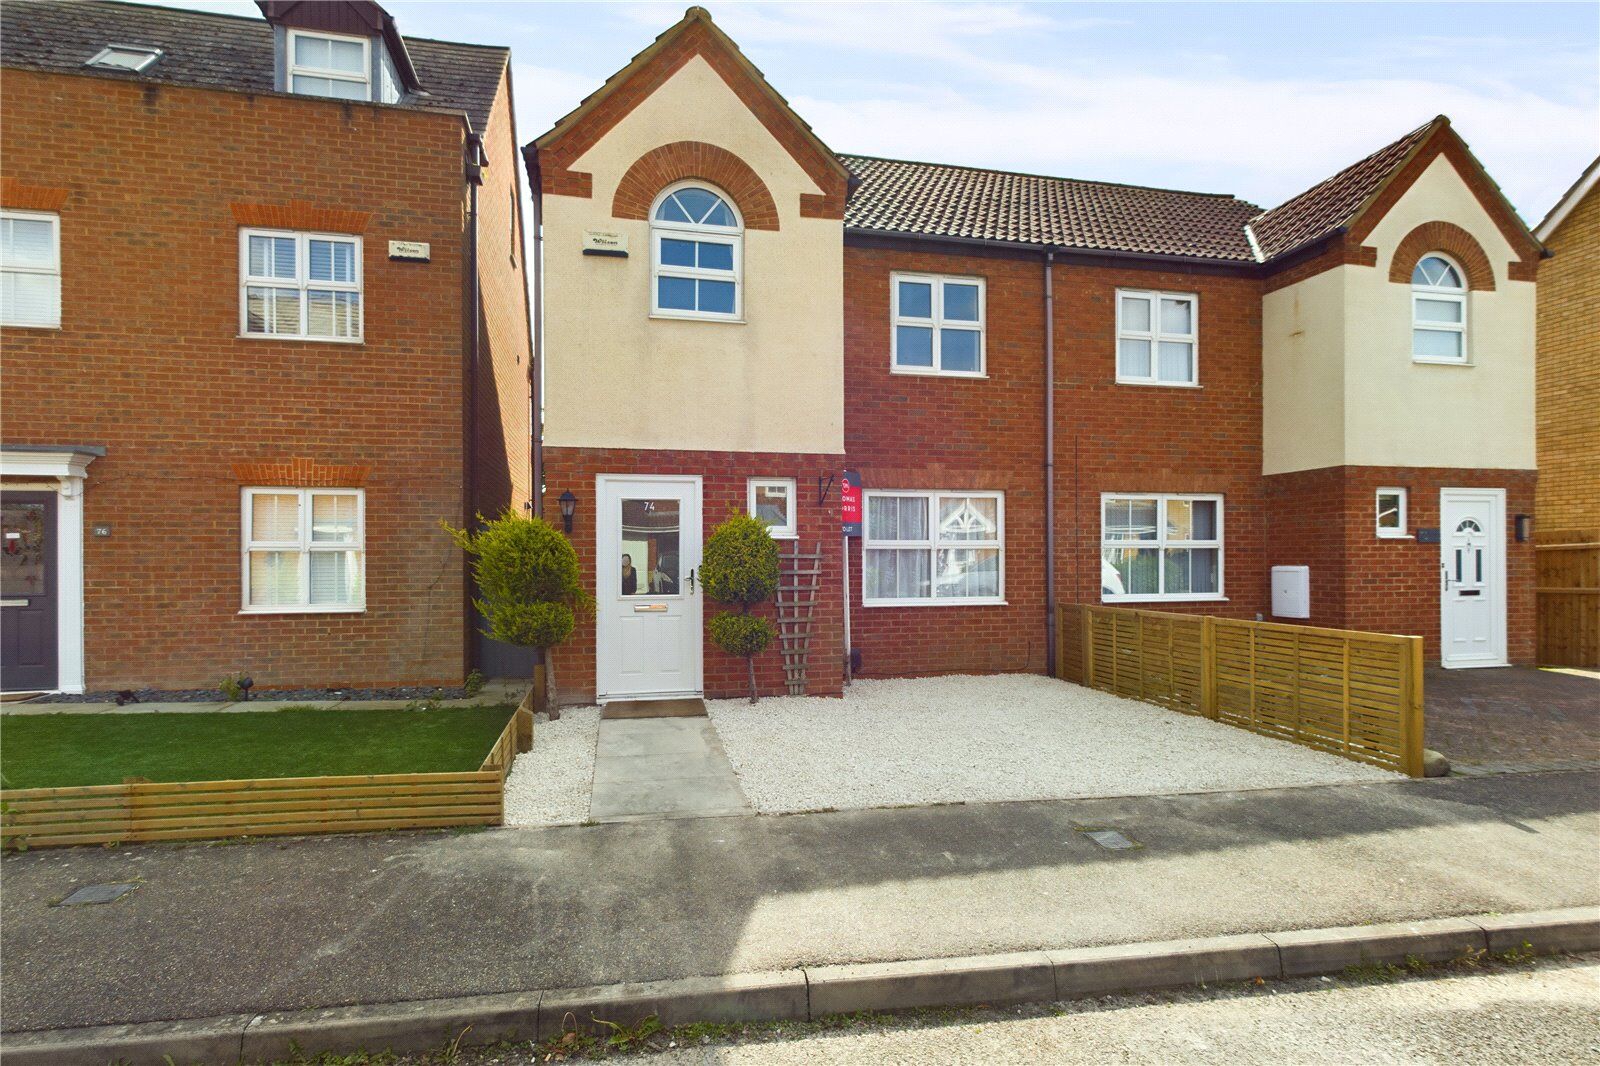 3 bedroom semi detached house to rent, Available from 15/07/2024 Redwing Rise, Royston, SG8, main image